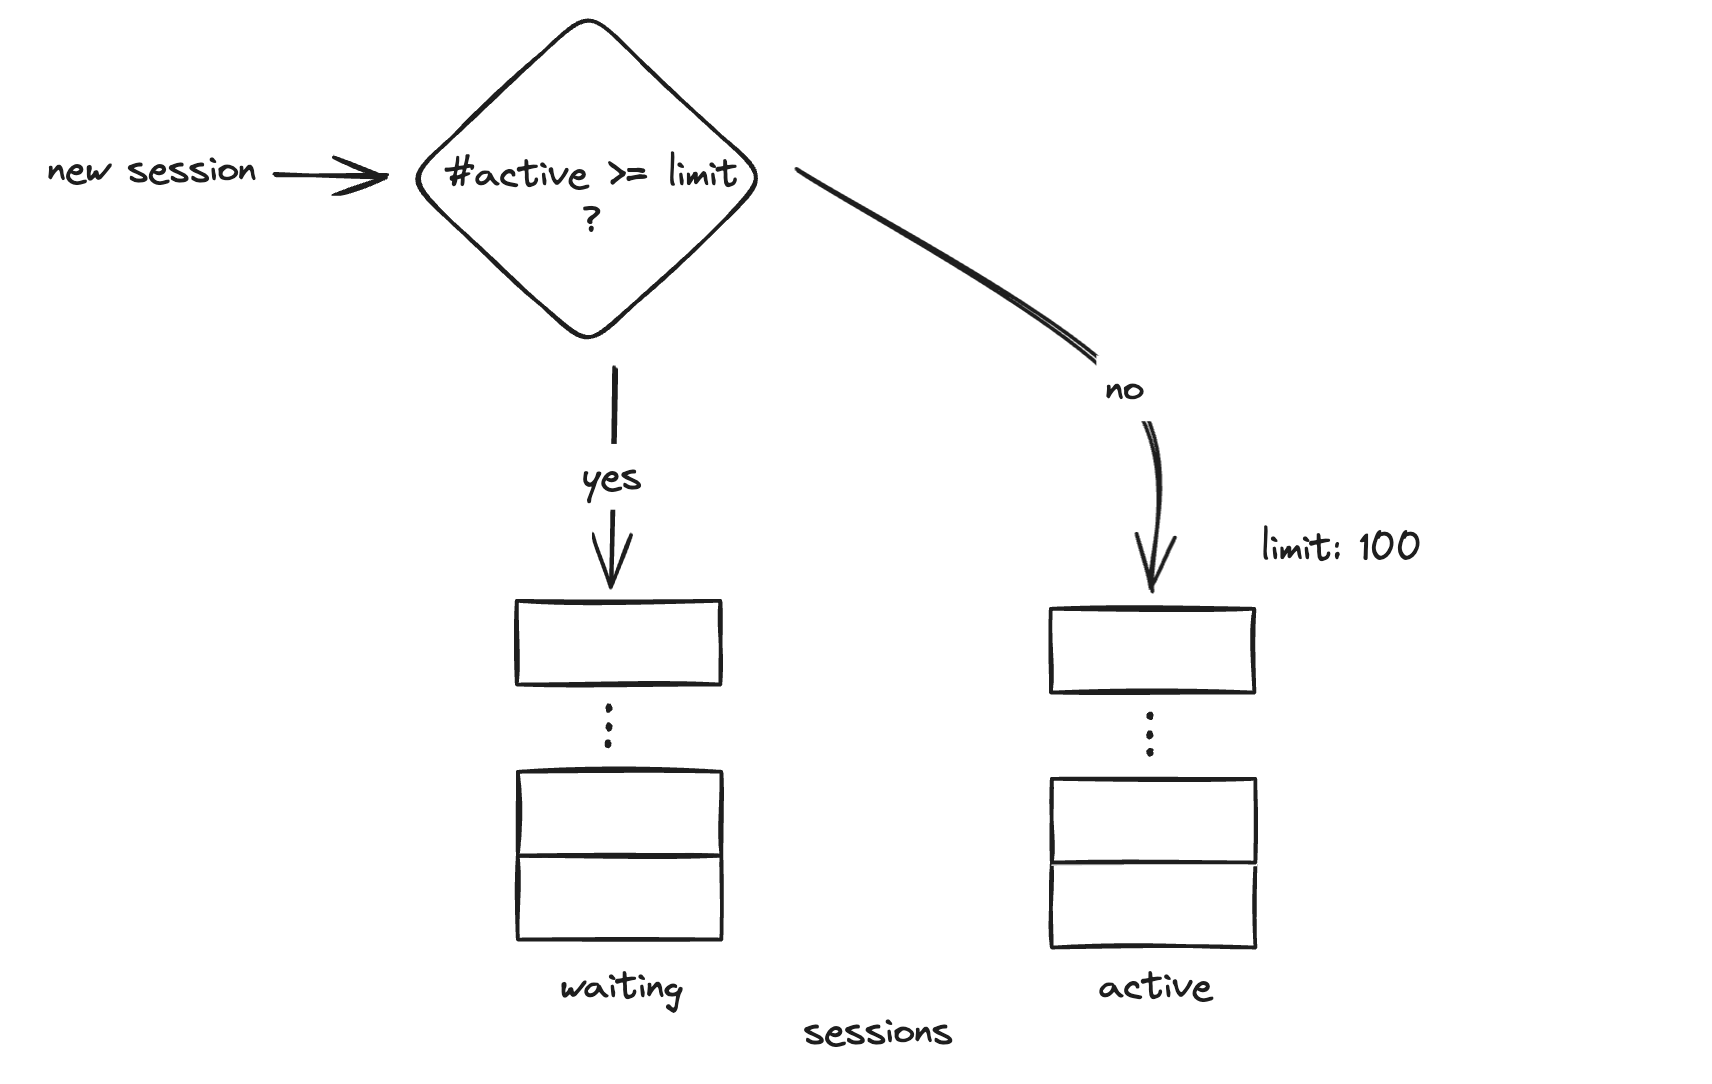 diagram of waitlist sessions